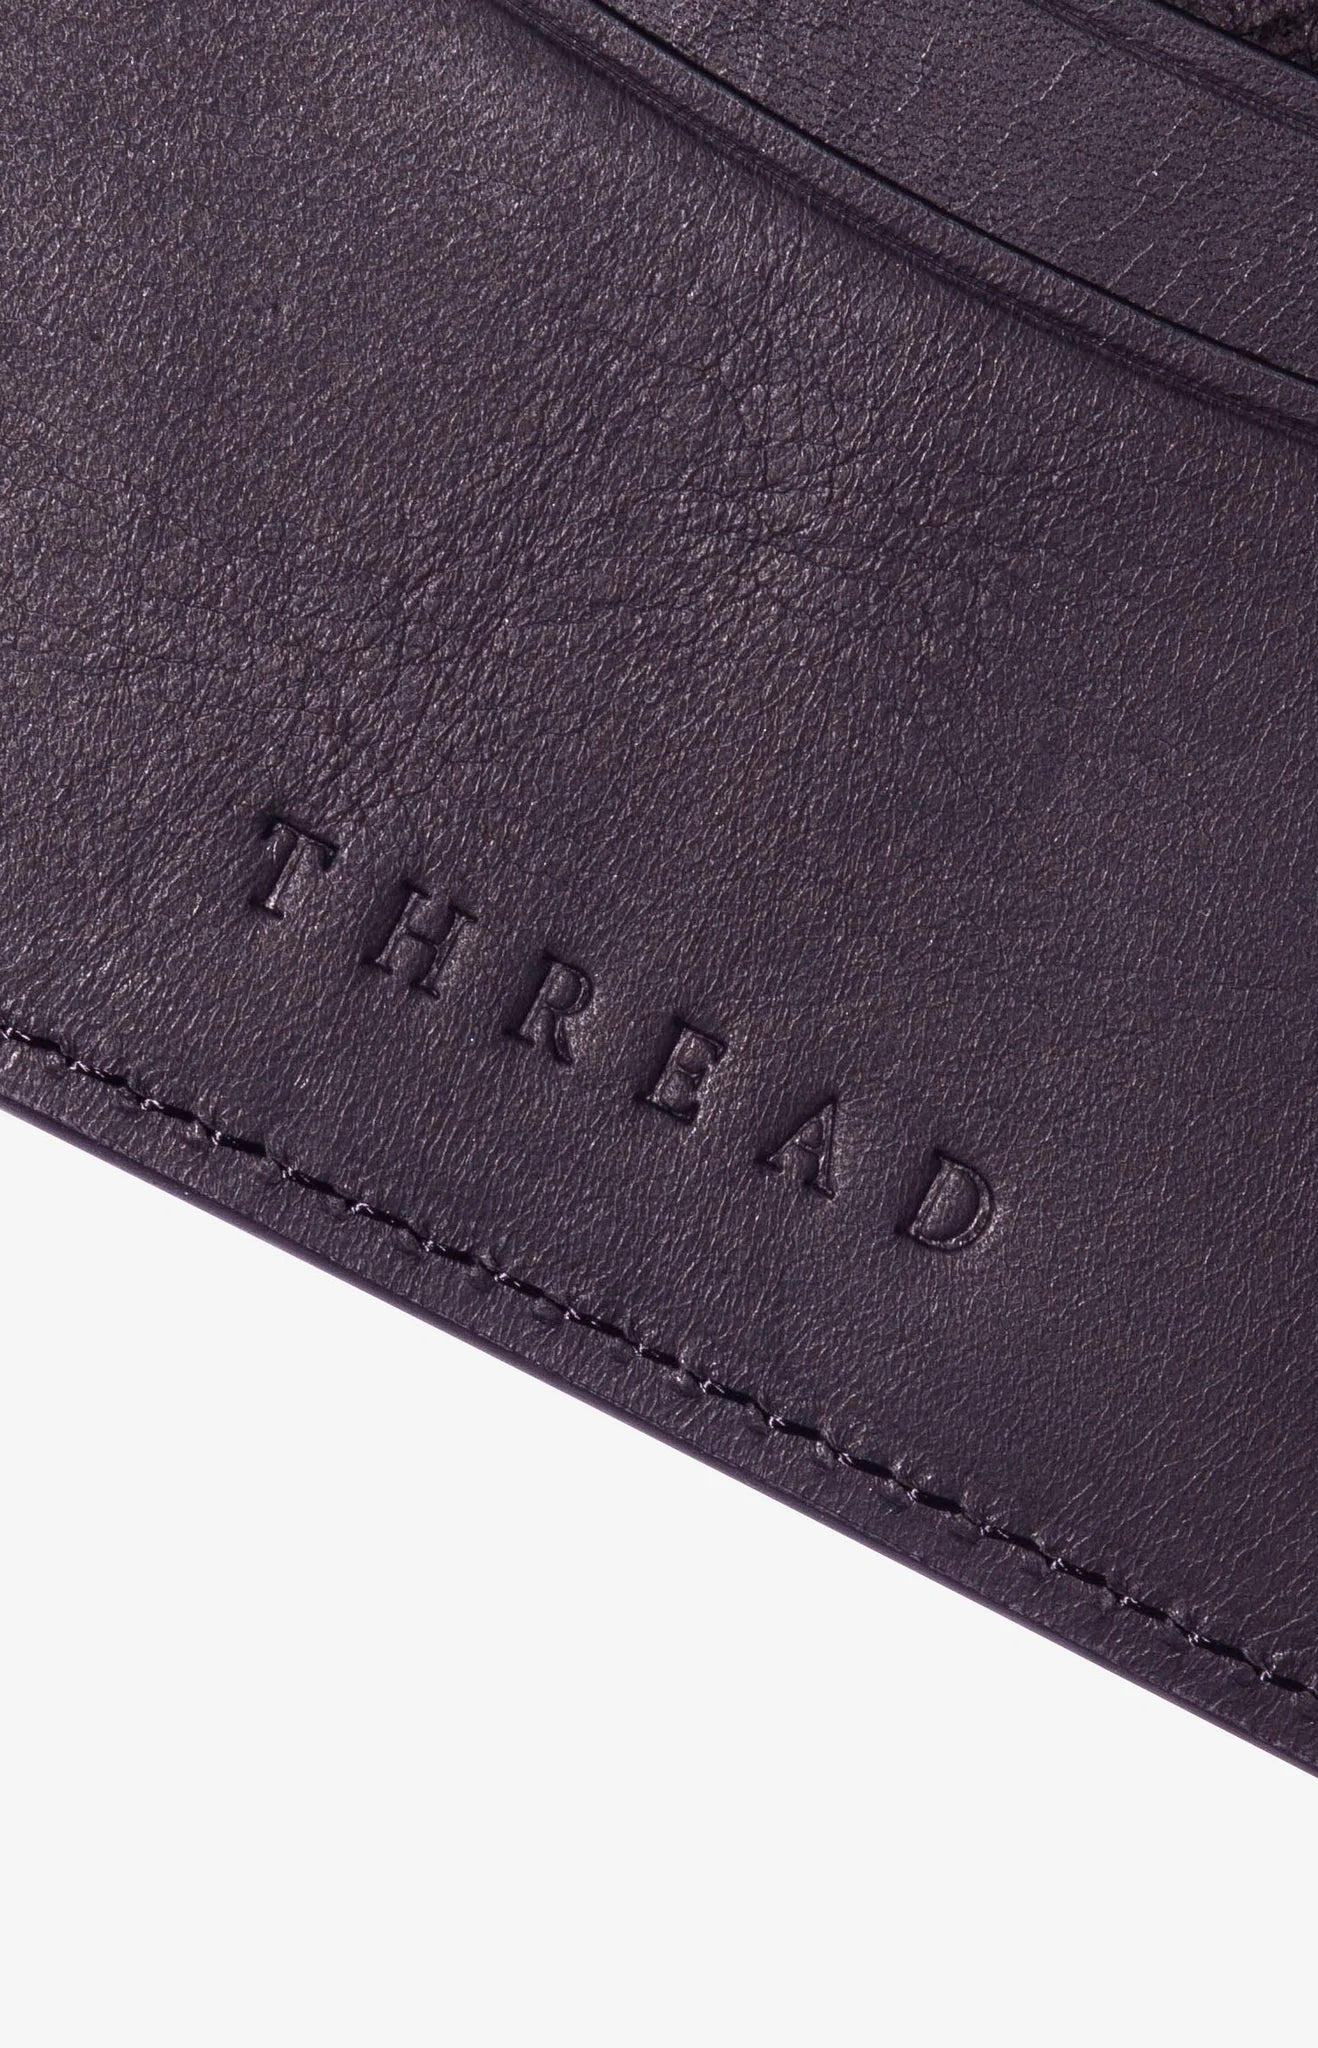 Faded Check Bifold Wallet    Wallets & Money Clips Thread- Tilden Co.